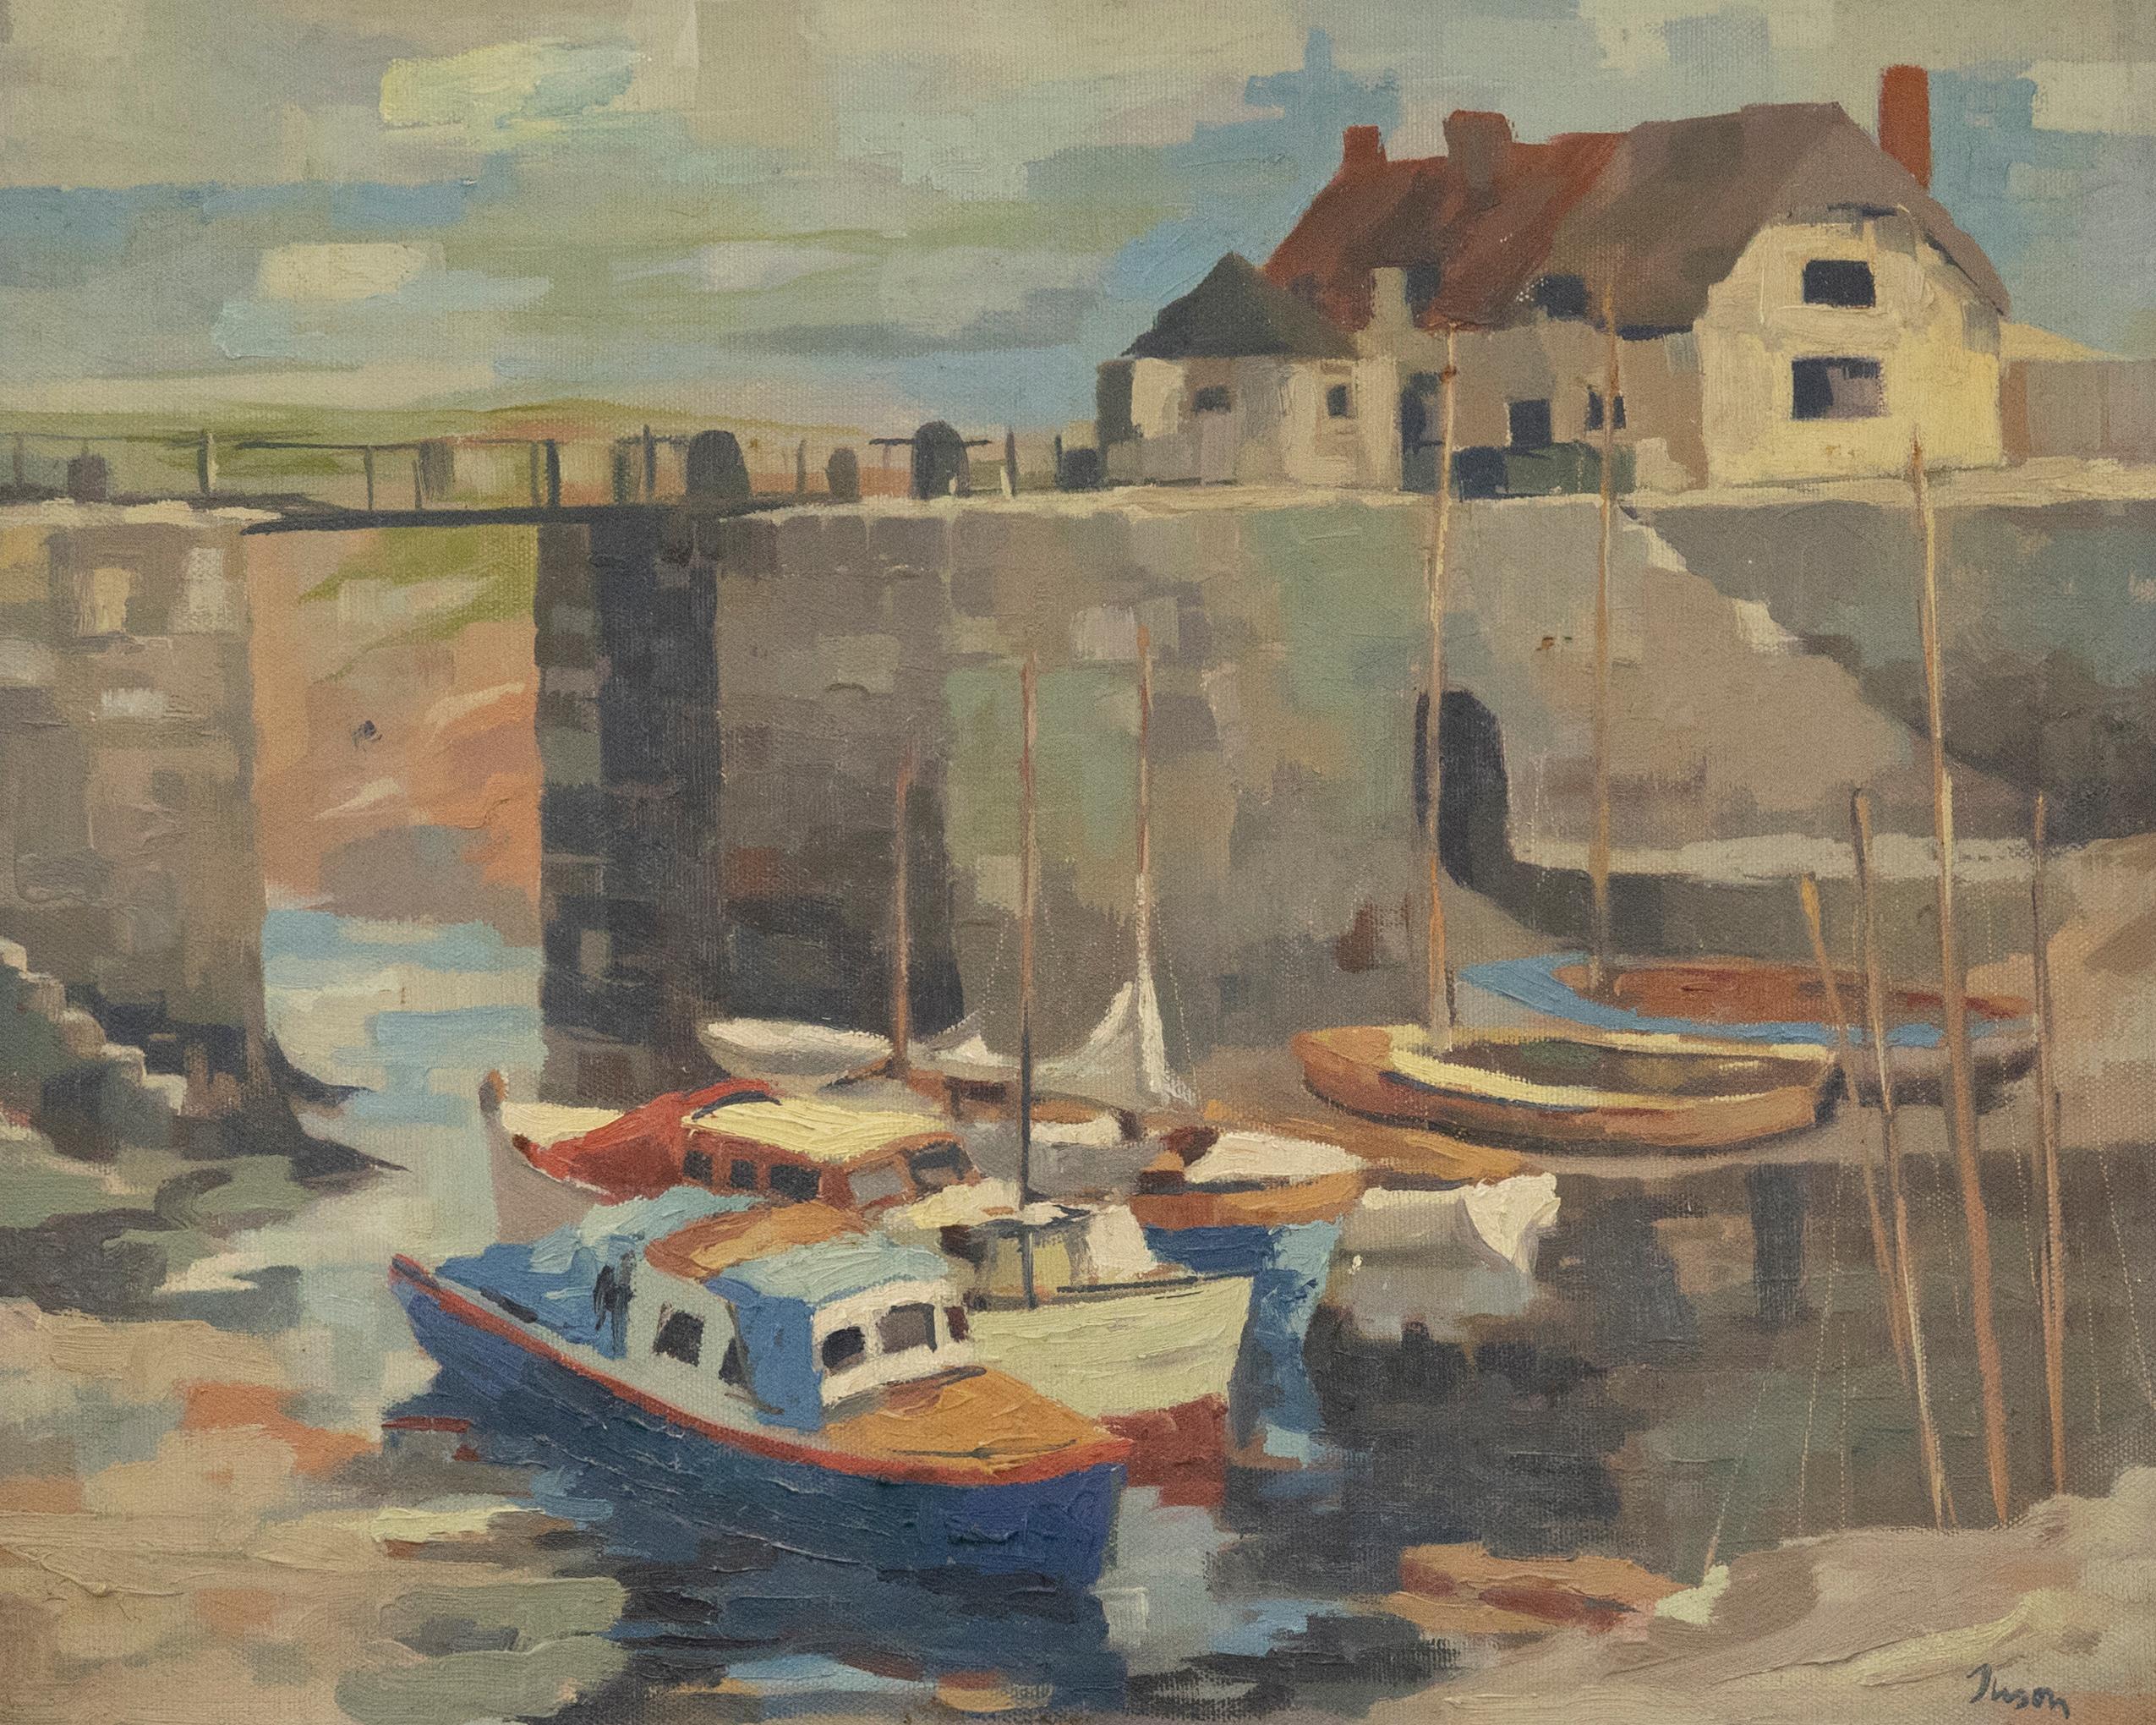 Tuson - Mid 20th Century Oil, The Harbour at Low Tide - Painting by Unknown